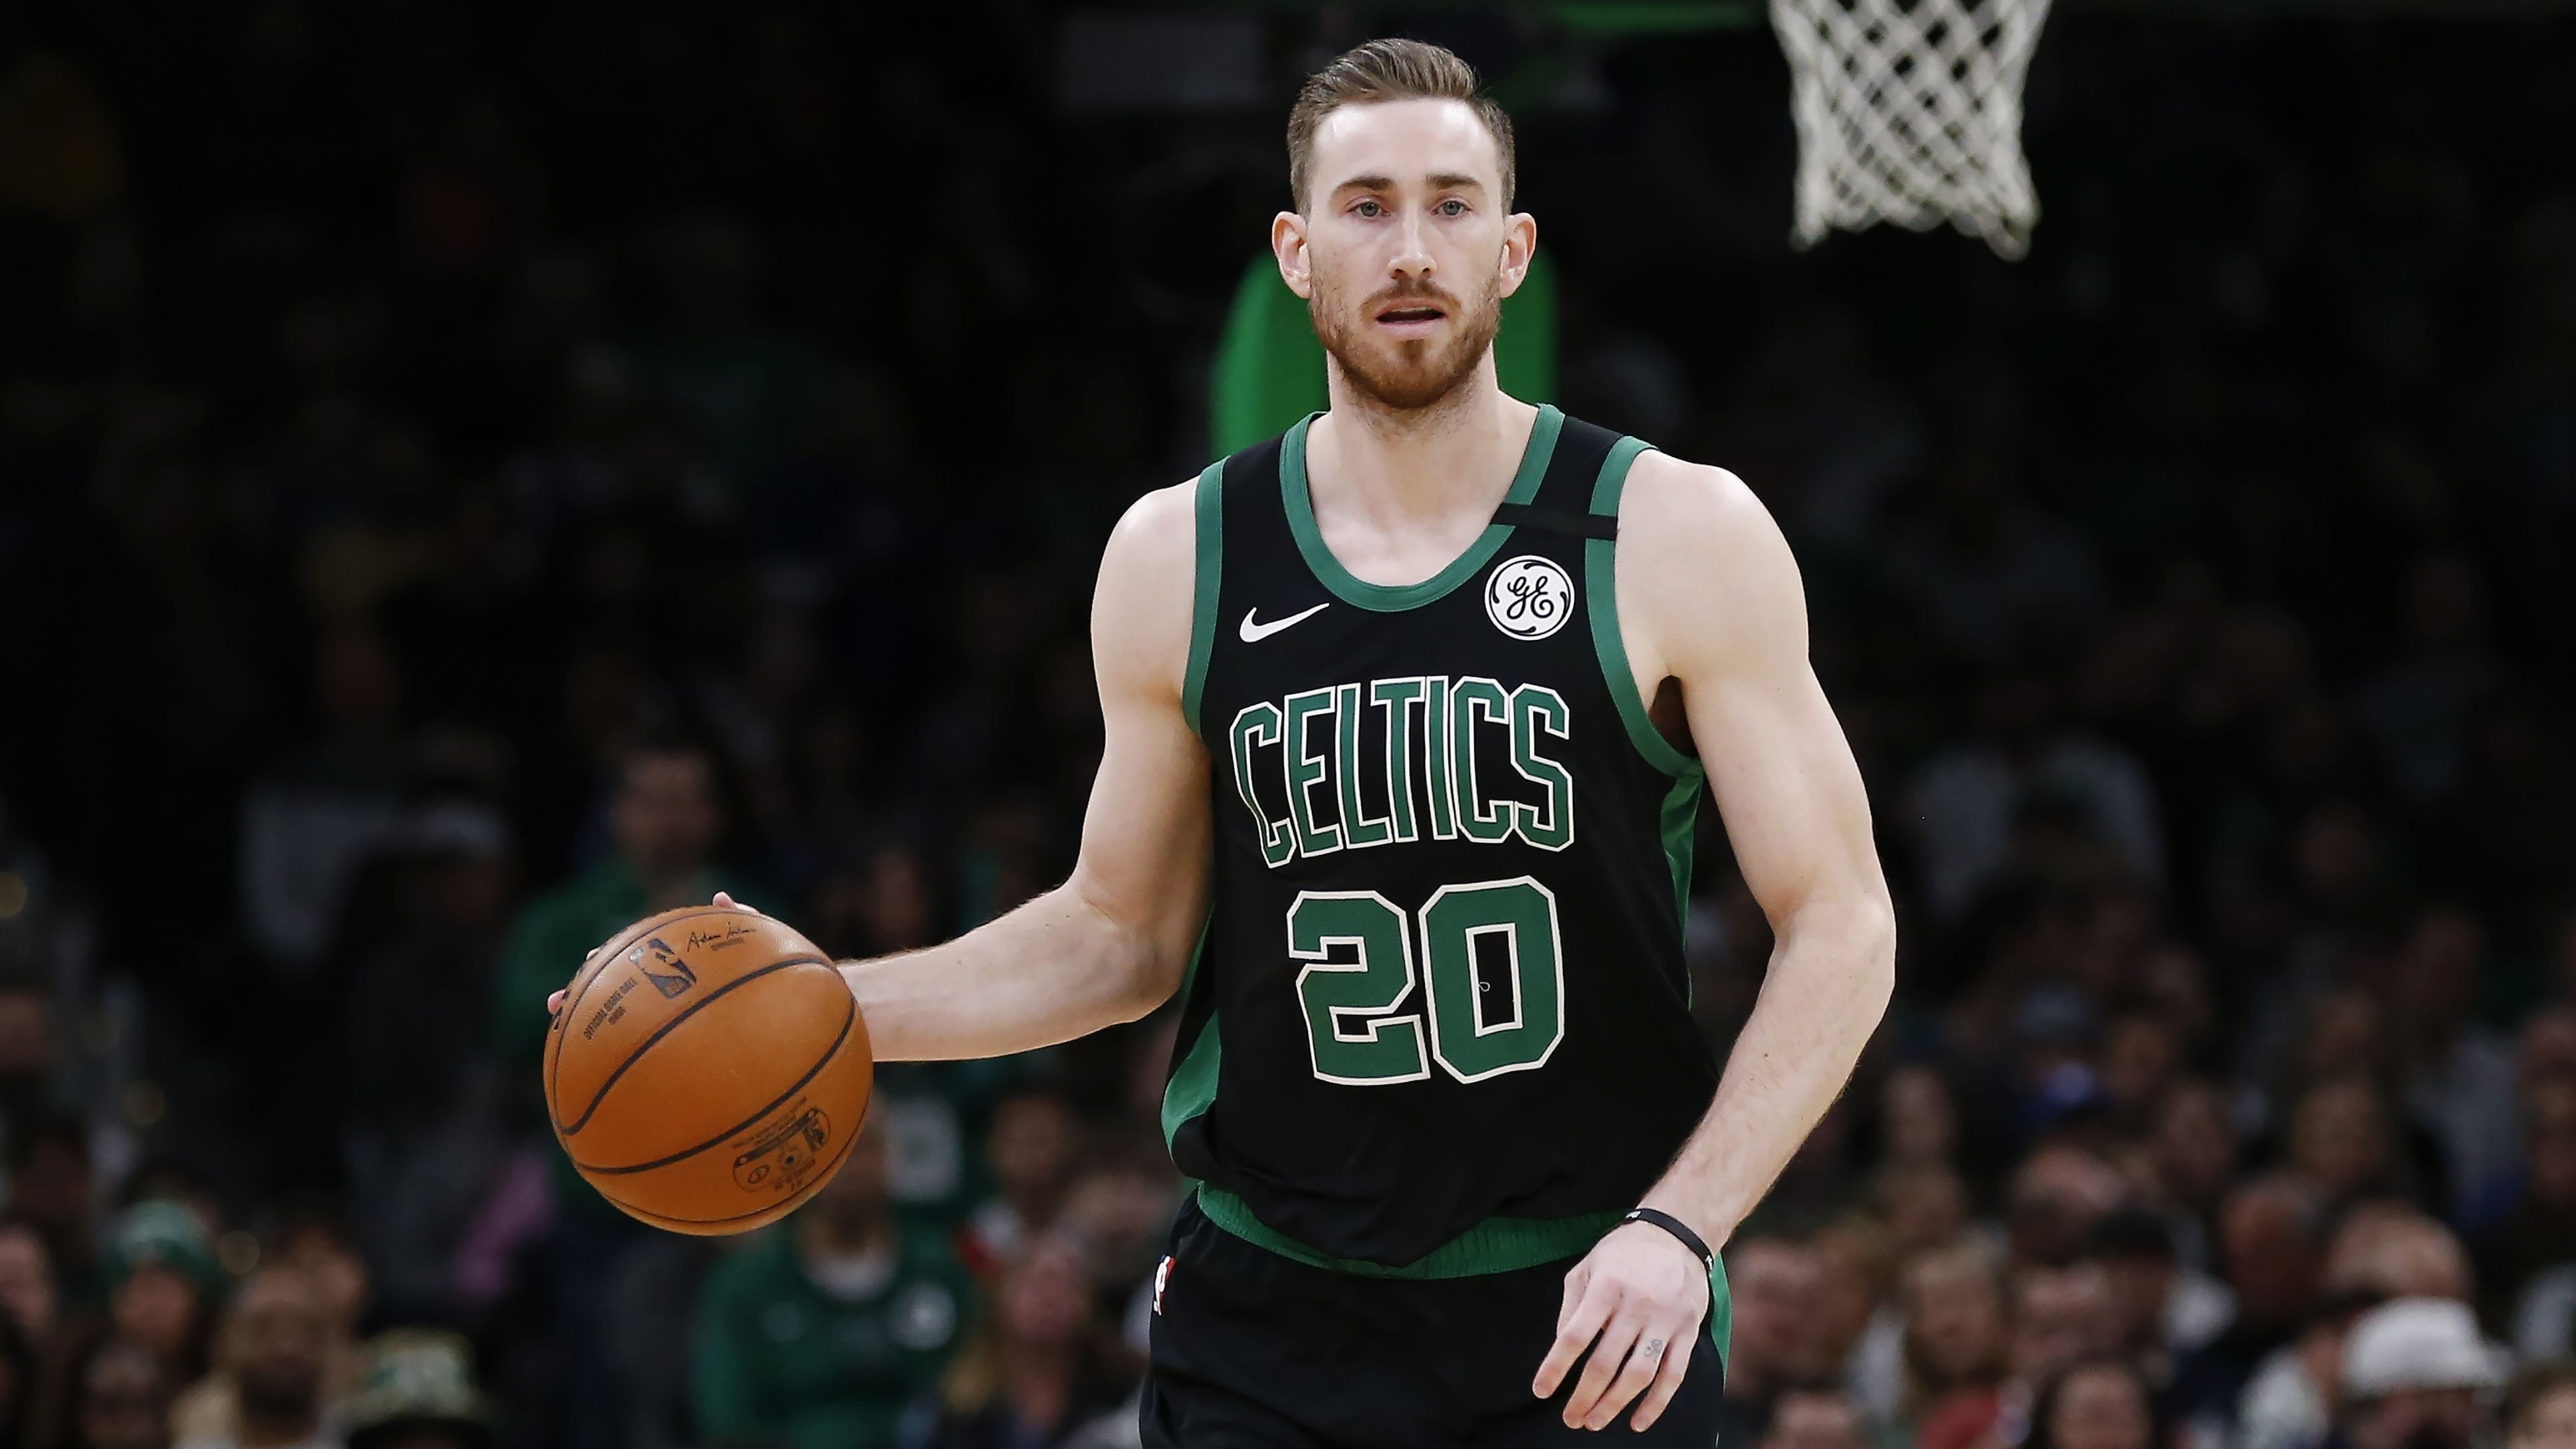 Why Gordon Hayward Will Not Opt-Out of His Contract – Guy Boston Sports